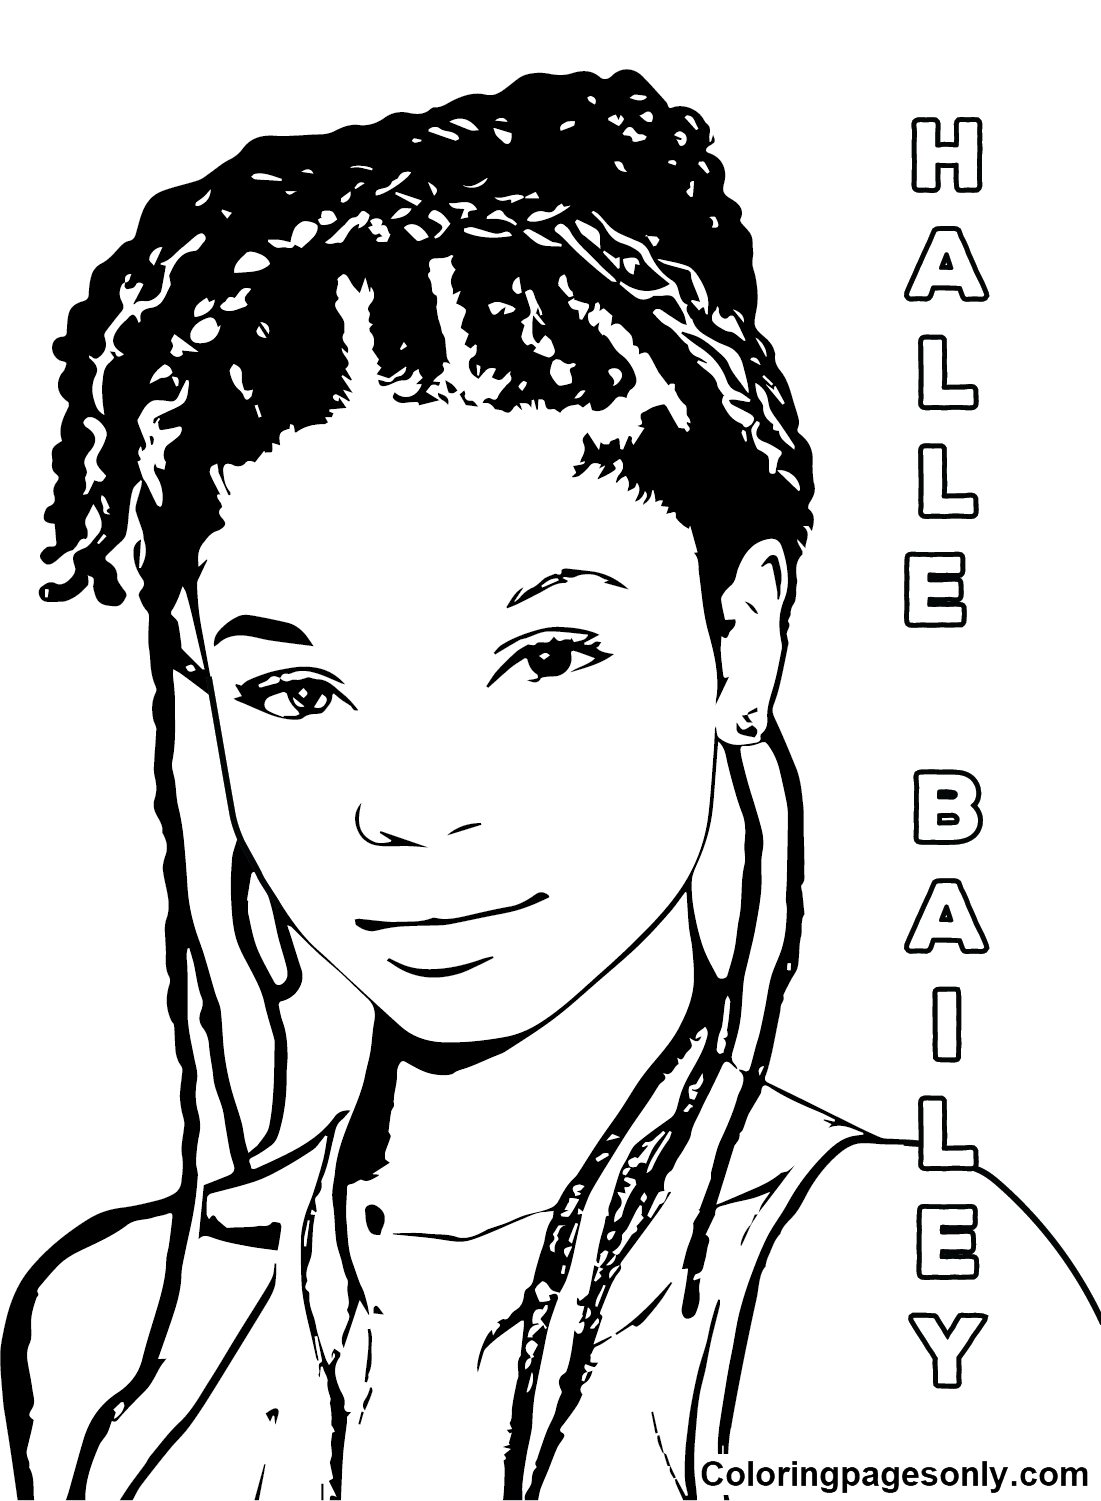 Halle Bailey Printable Coloring Page